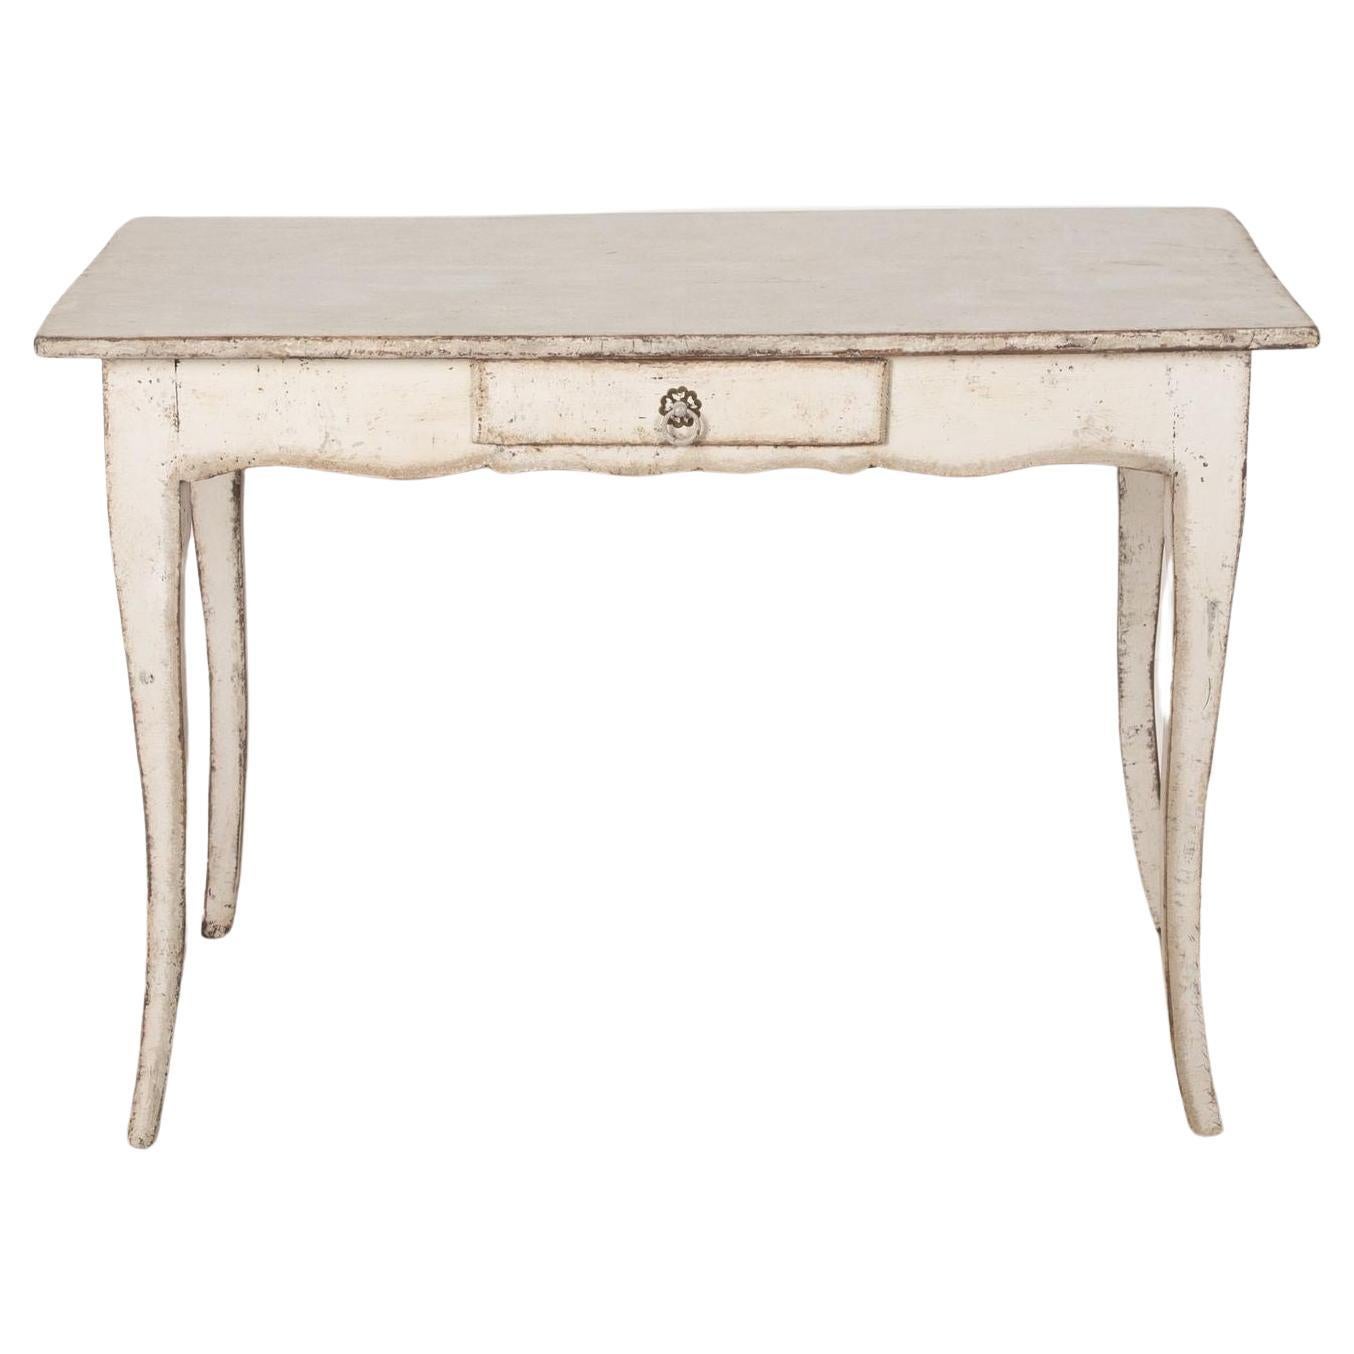 19th Century Provencal Side Table